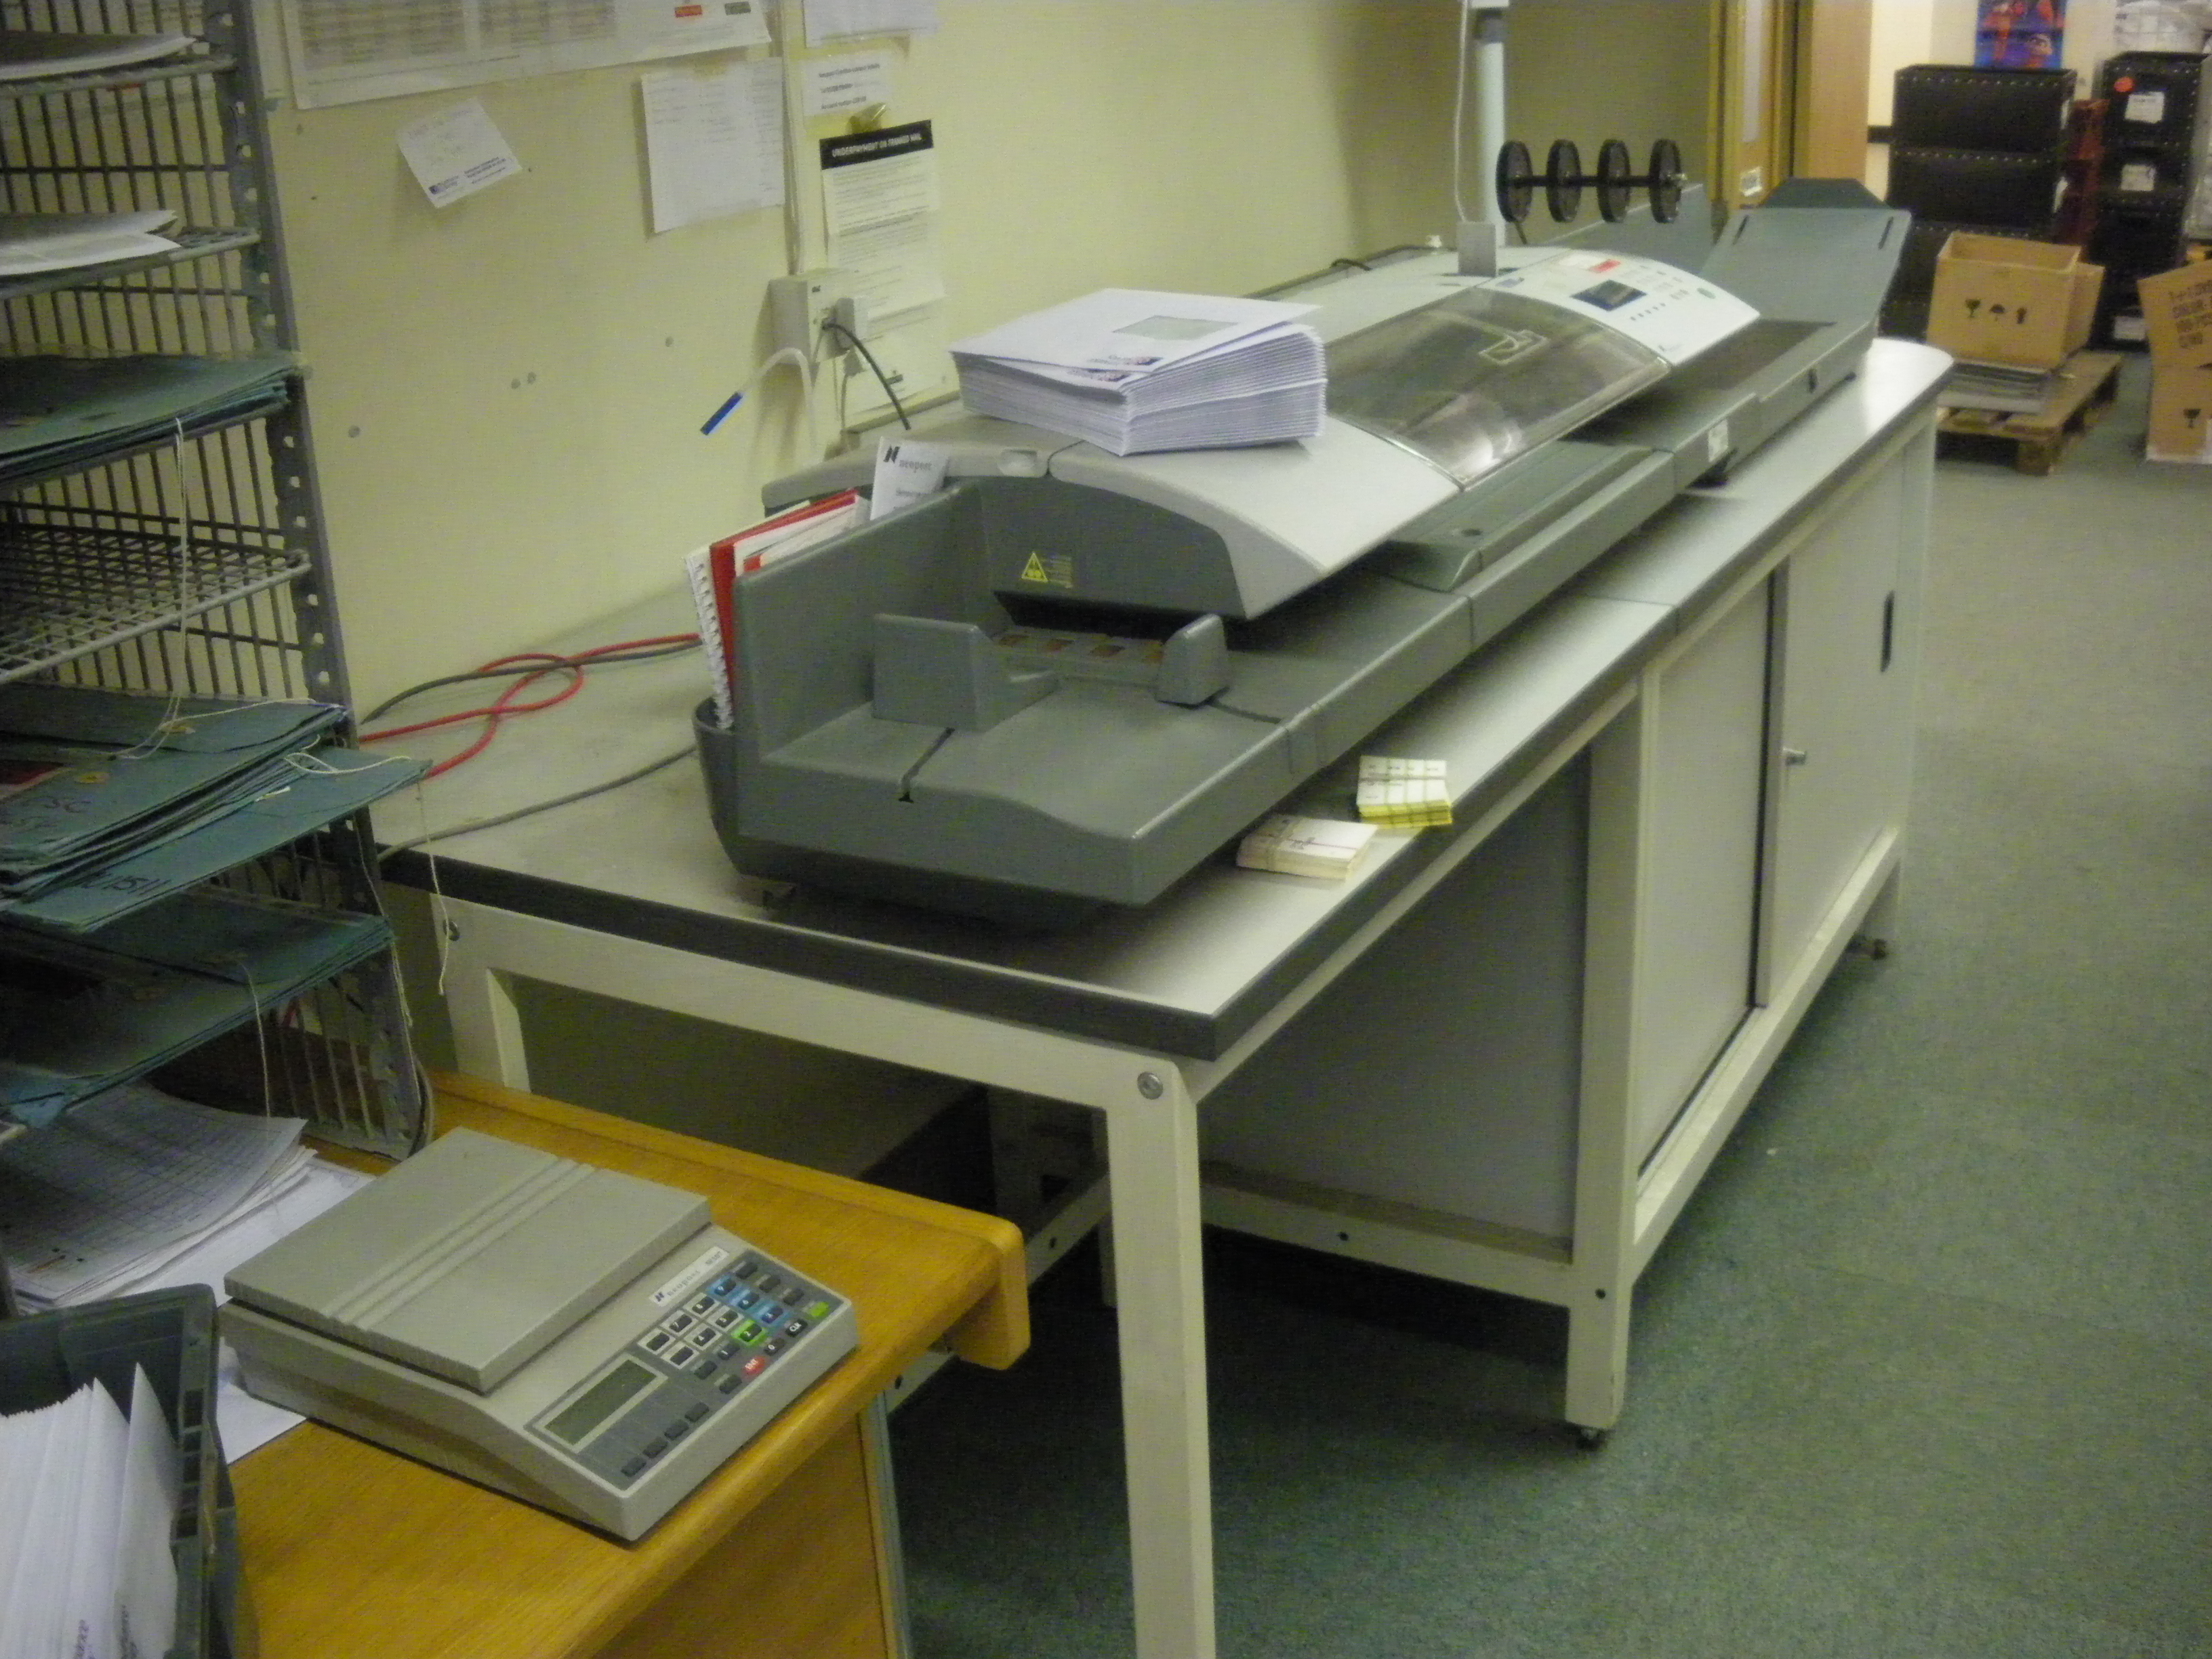 Post Room - franking machine and scales